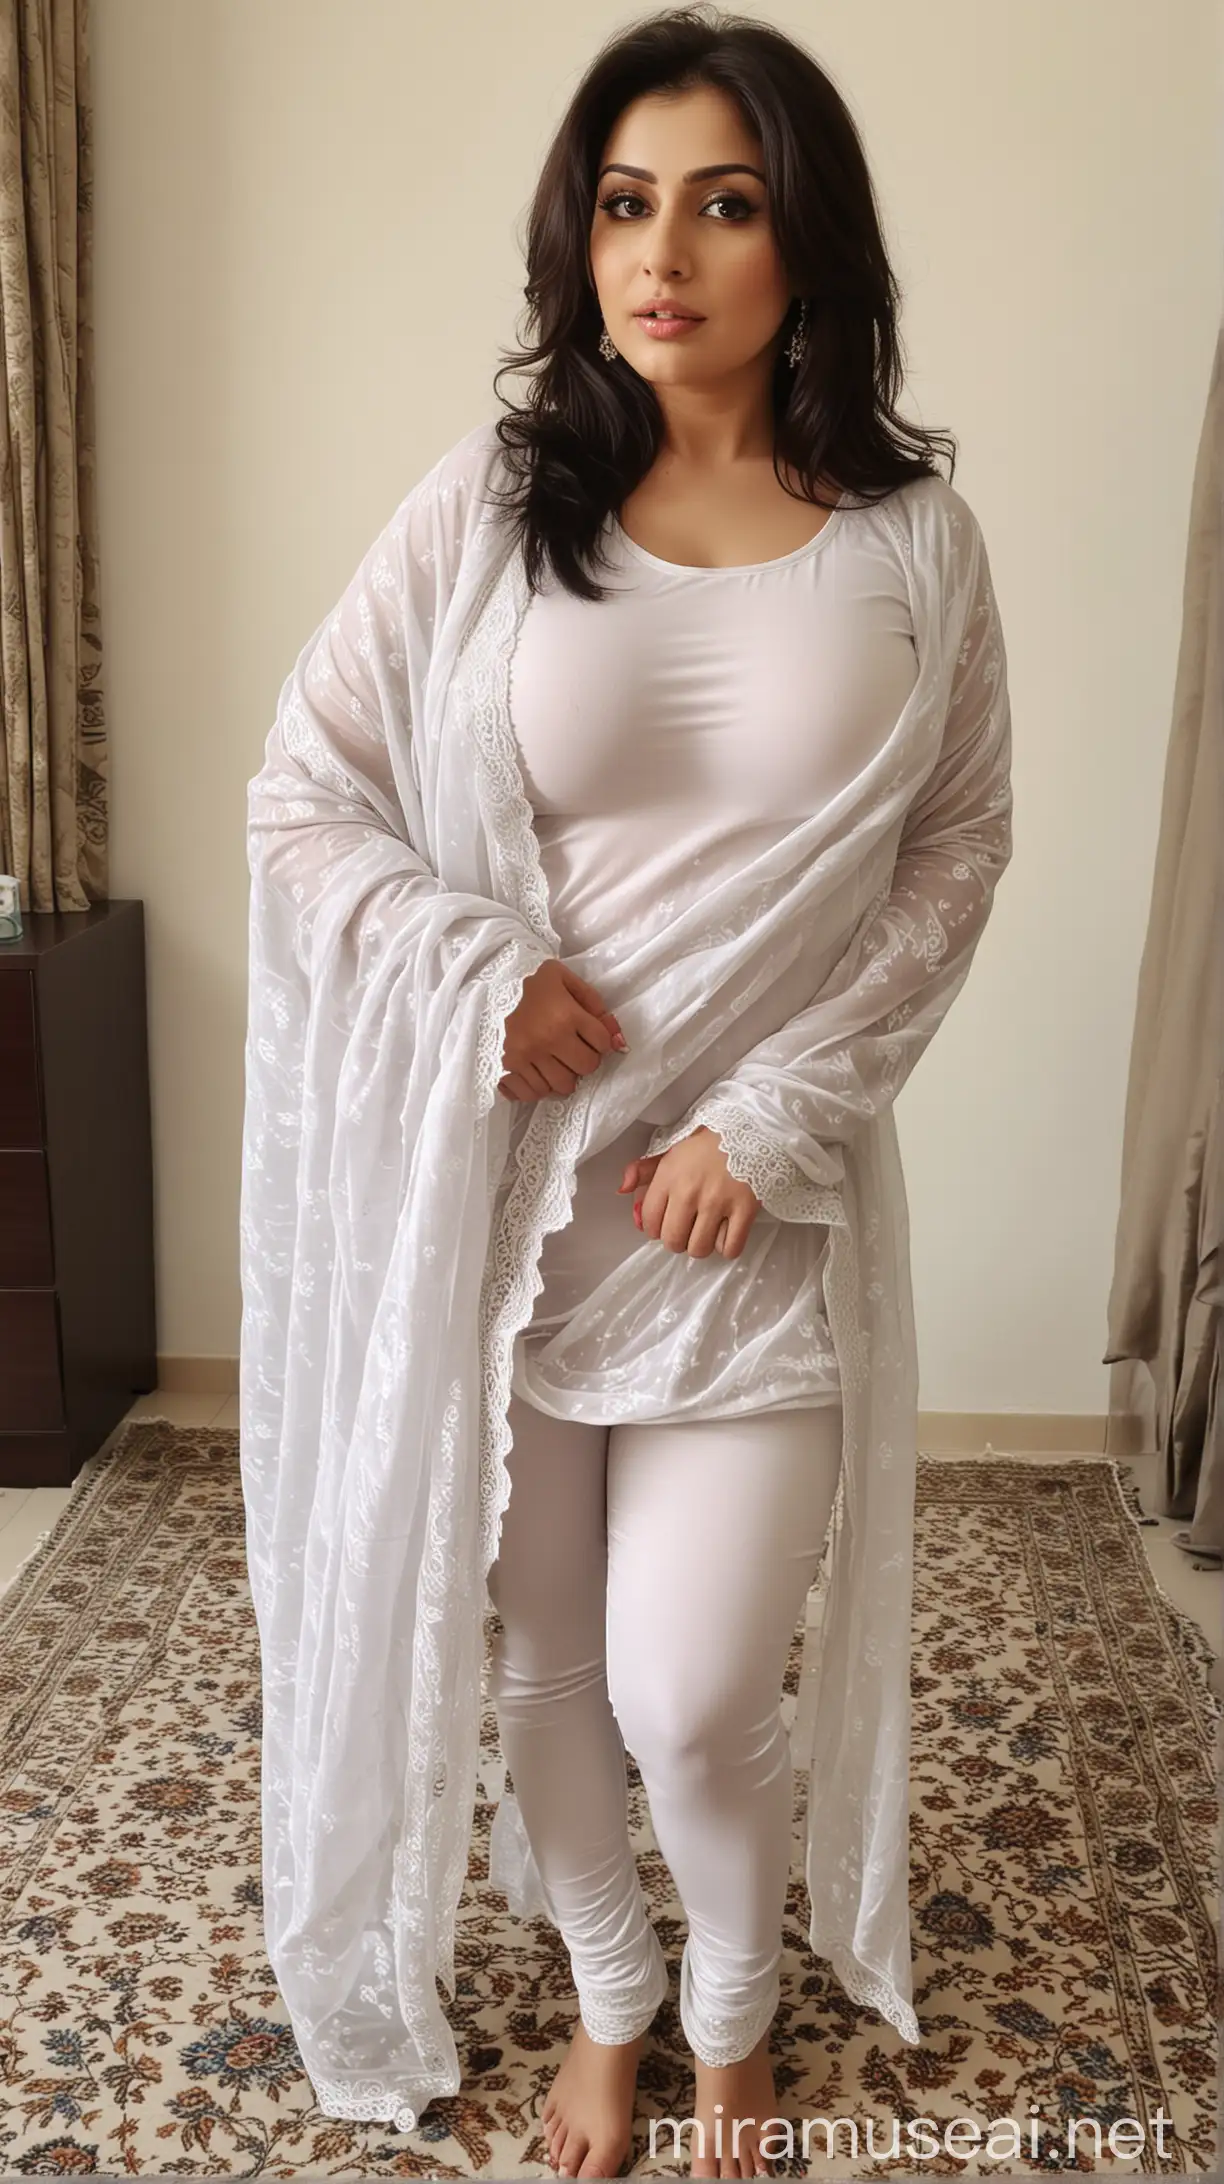 Sultry Pakistani Mistress with Alluring Curves in Cotton Dupatta Pose